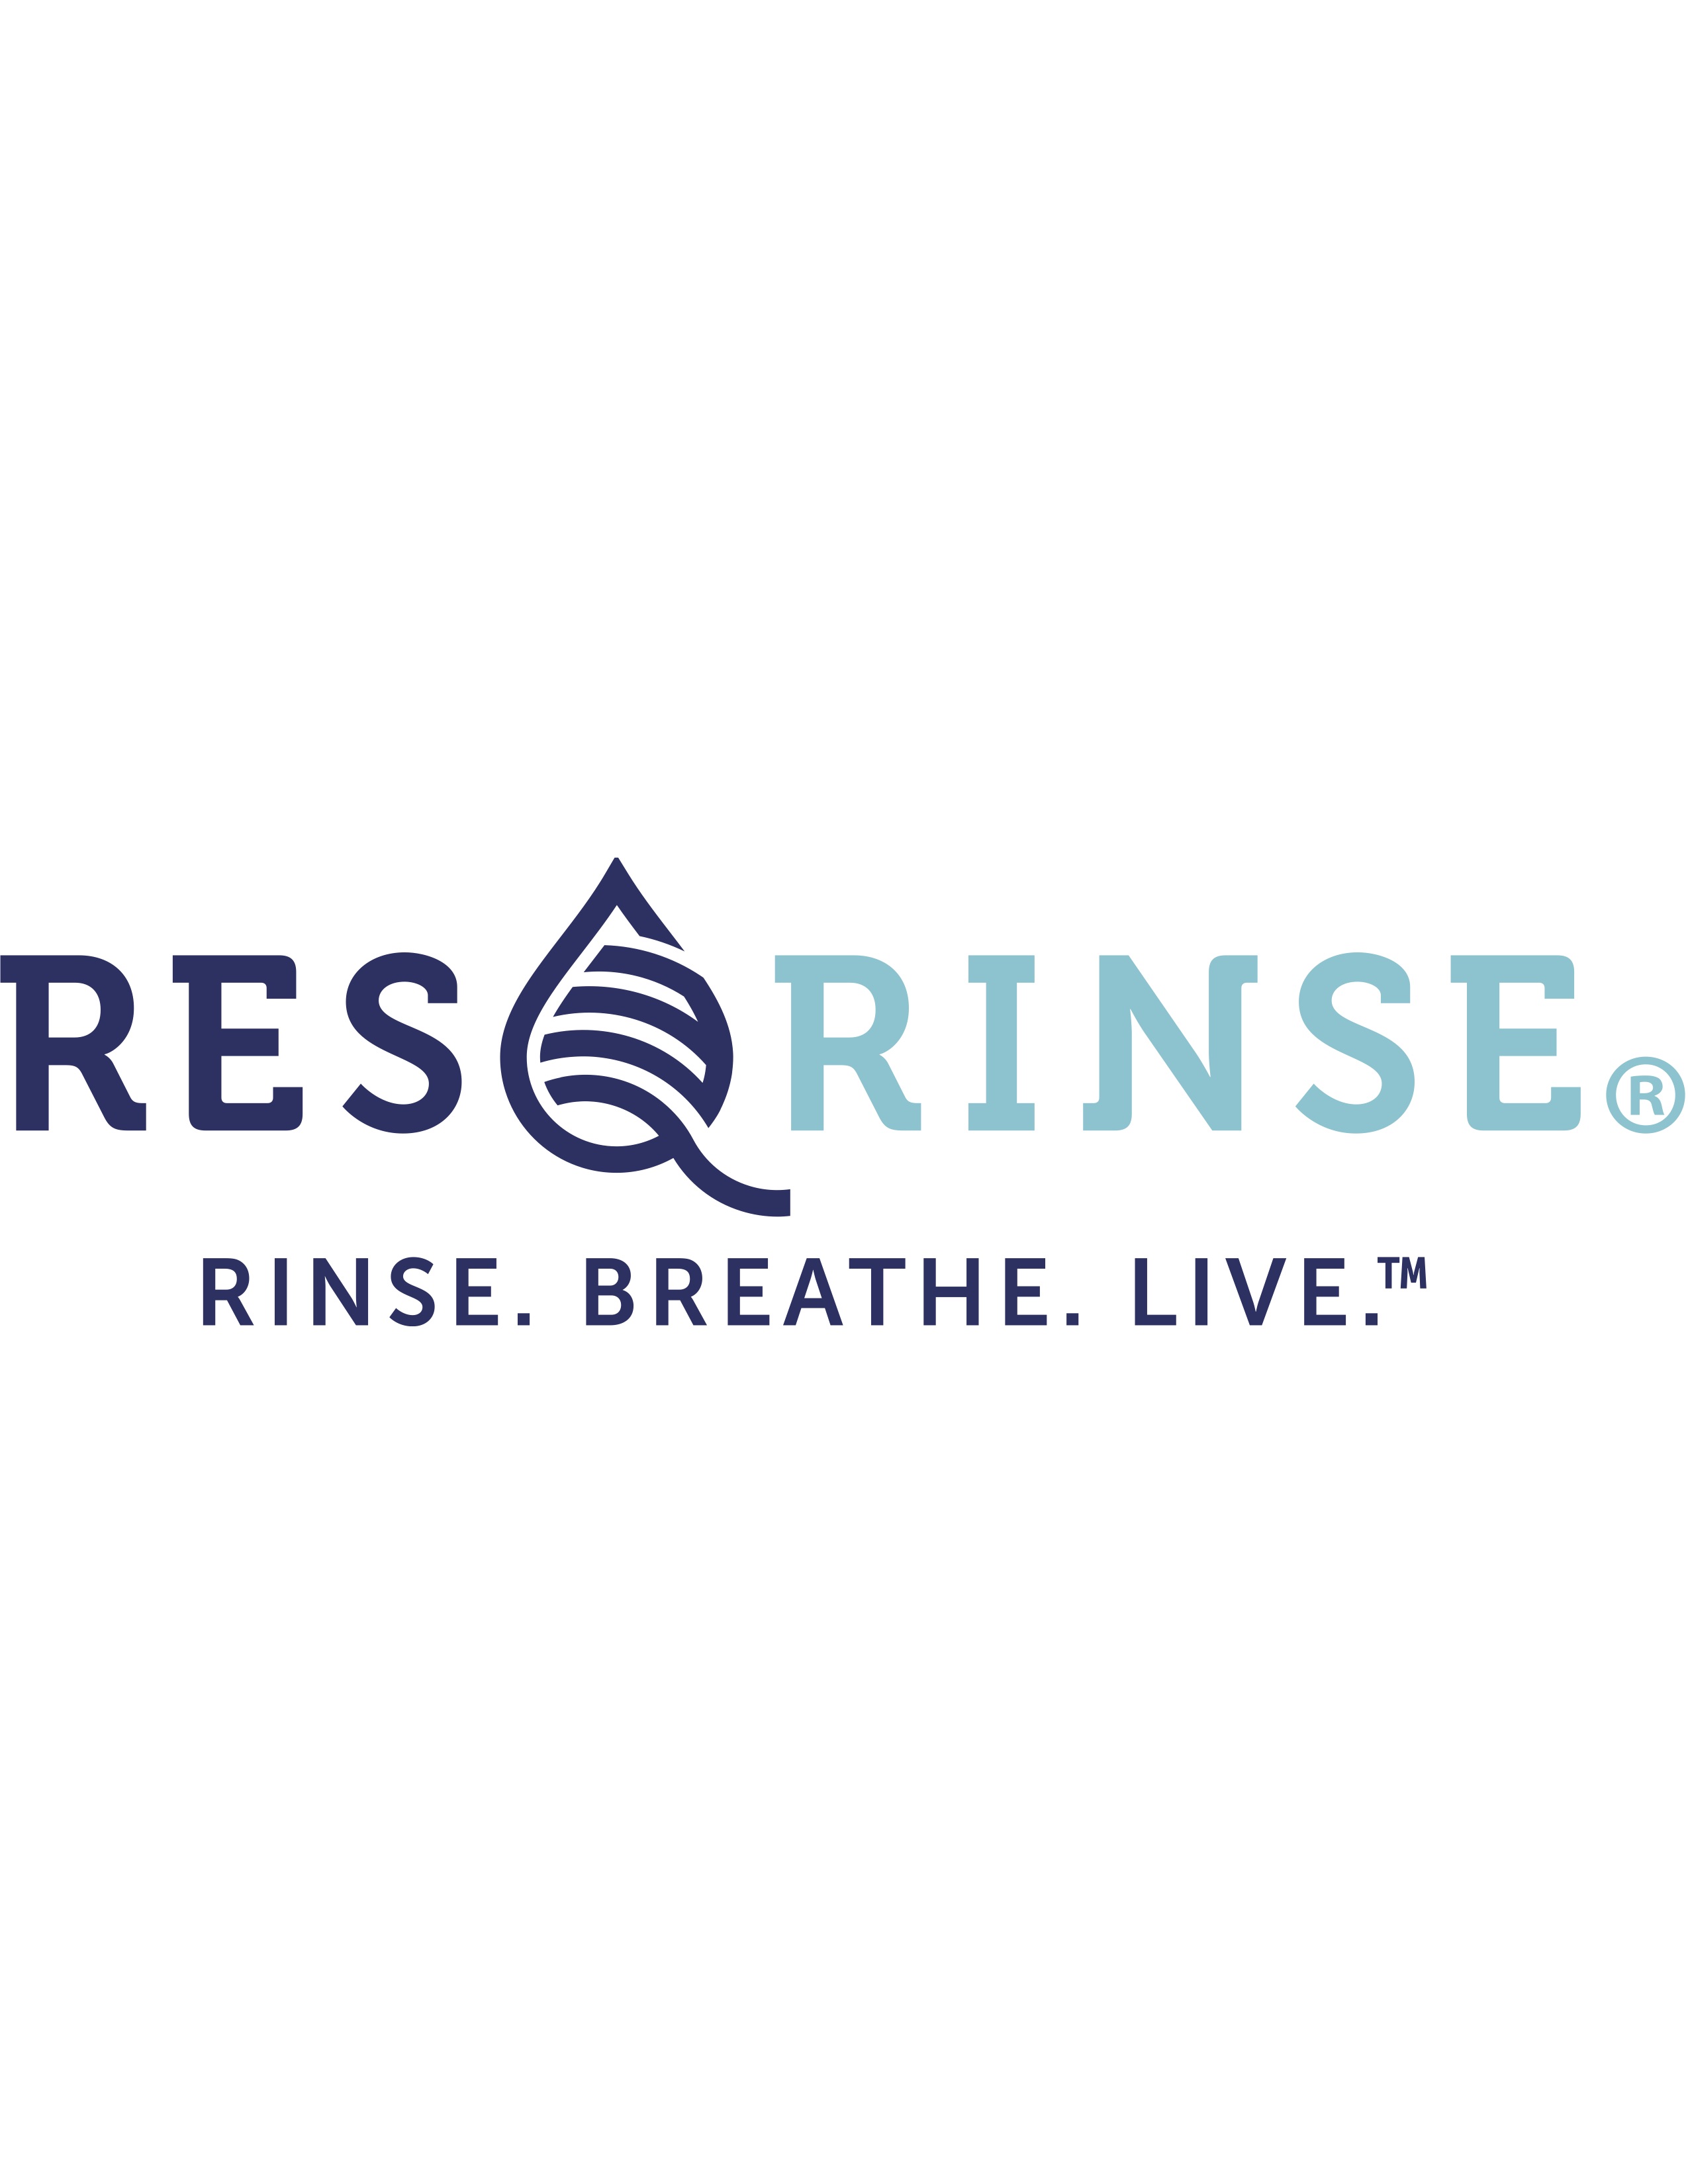 ResQRinse – a revolutionary, new sinonasal irrigation system – is designed to eliminate the negative side effects of traditional sinus rinsing devices.